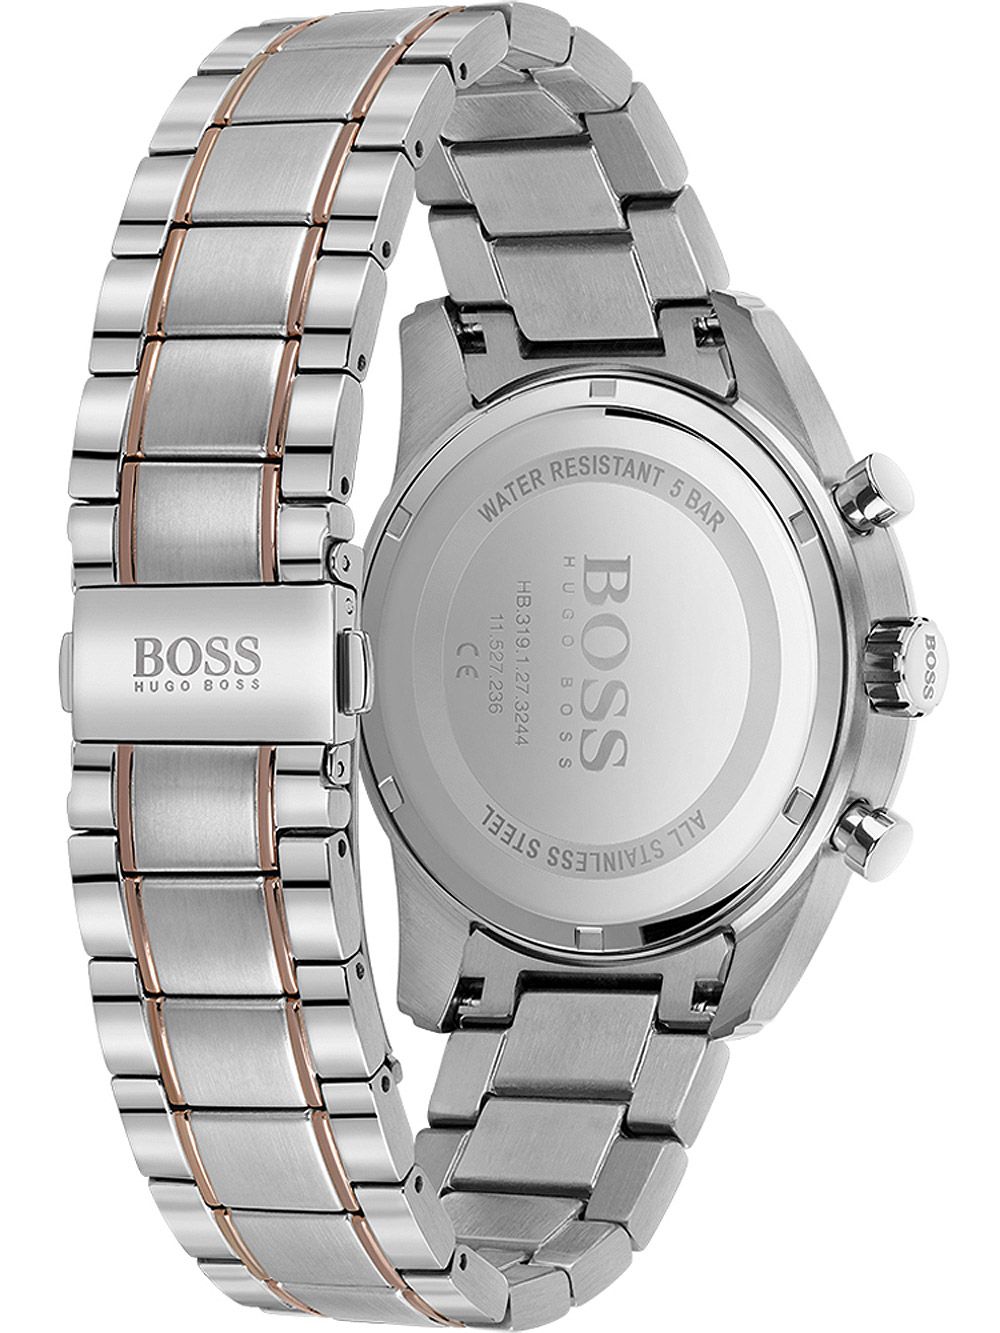 Hugo Boss Skymaster Two Tone Chronograph Men's Watch 1513789 - Big Daddy Watches #3